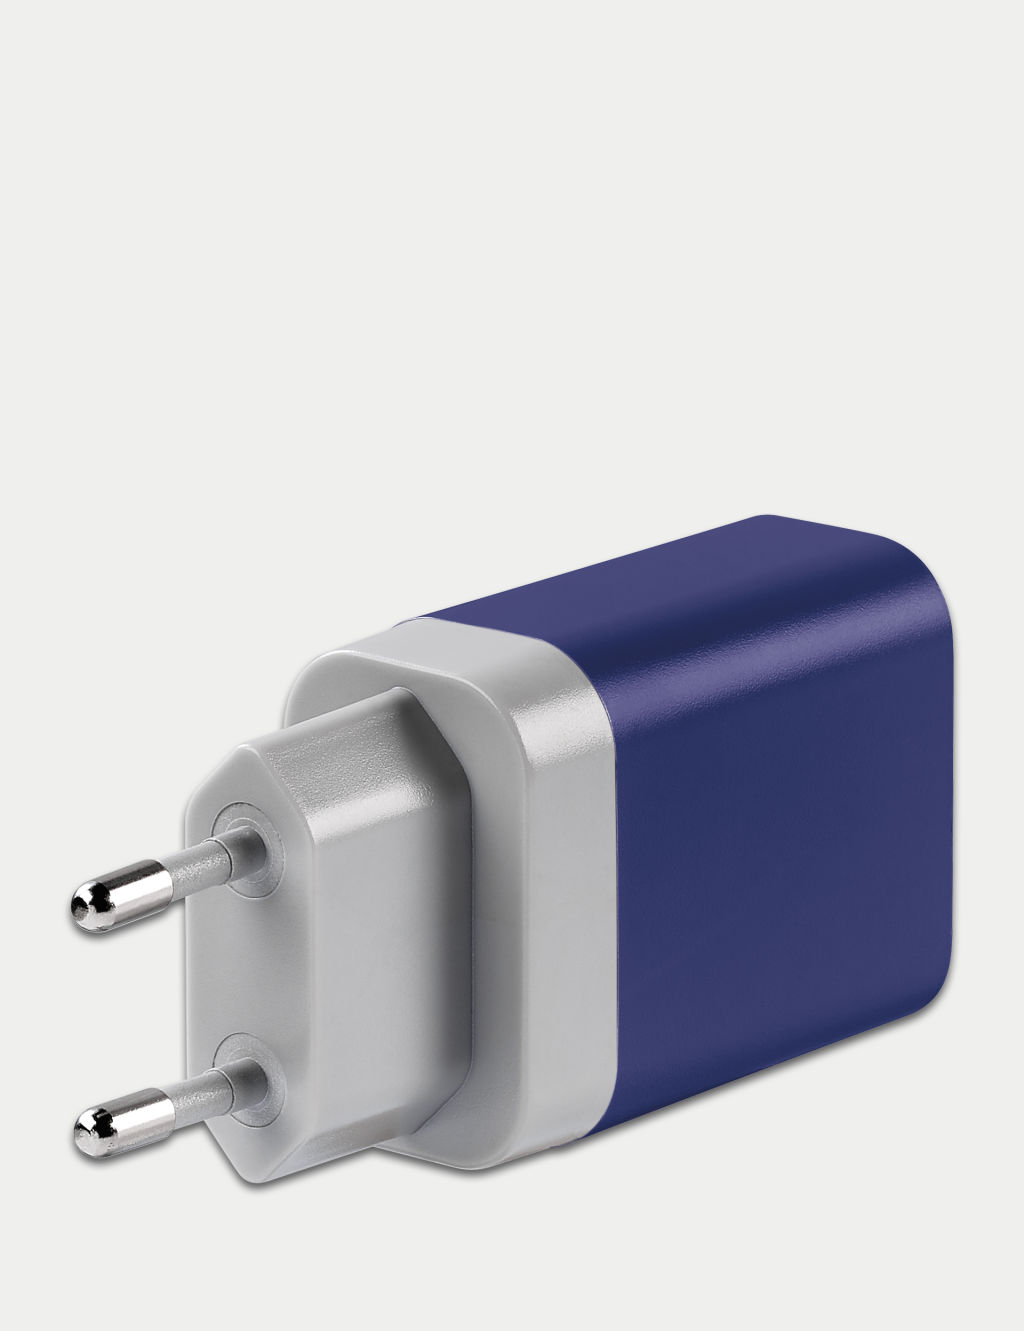 Worldwide USB A & C Charger 7 of 7